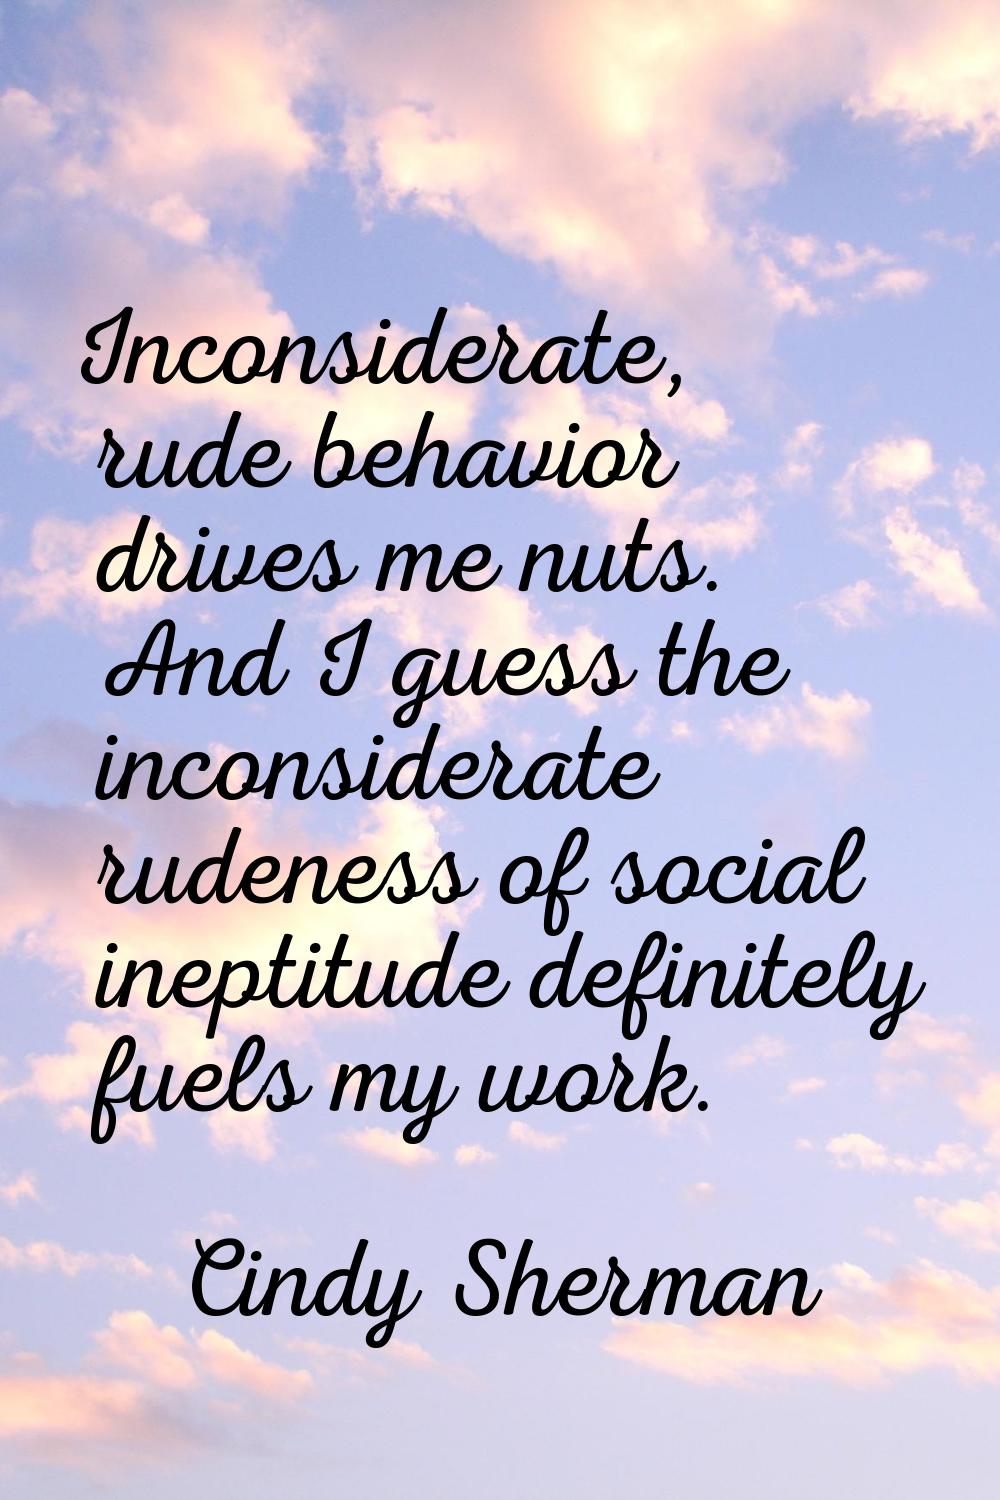 Inconsiderate, rude behavior drives me nuts. And I guess the inconsiderate rudeness of social inept